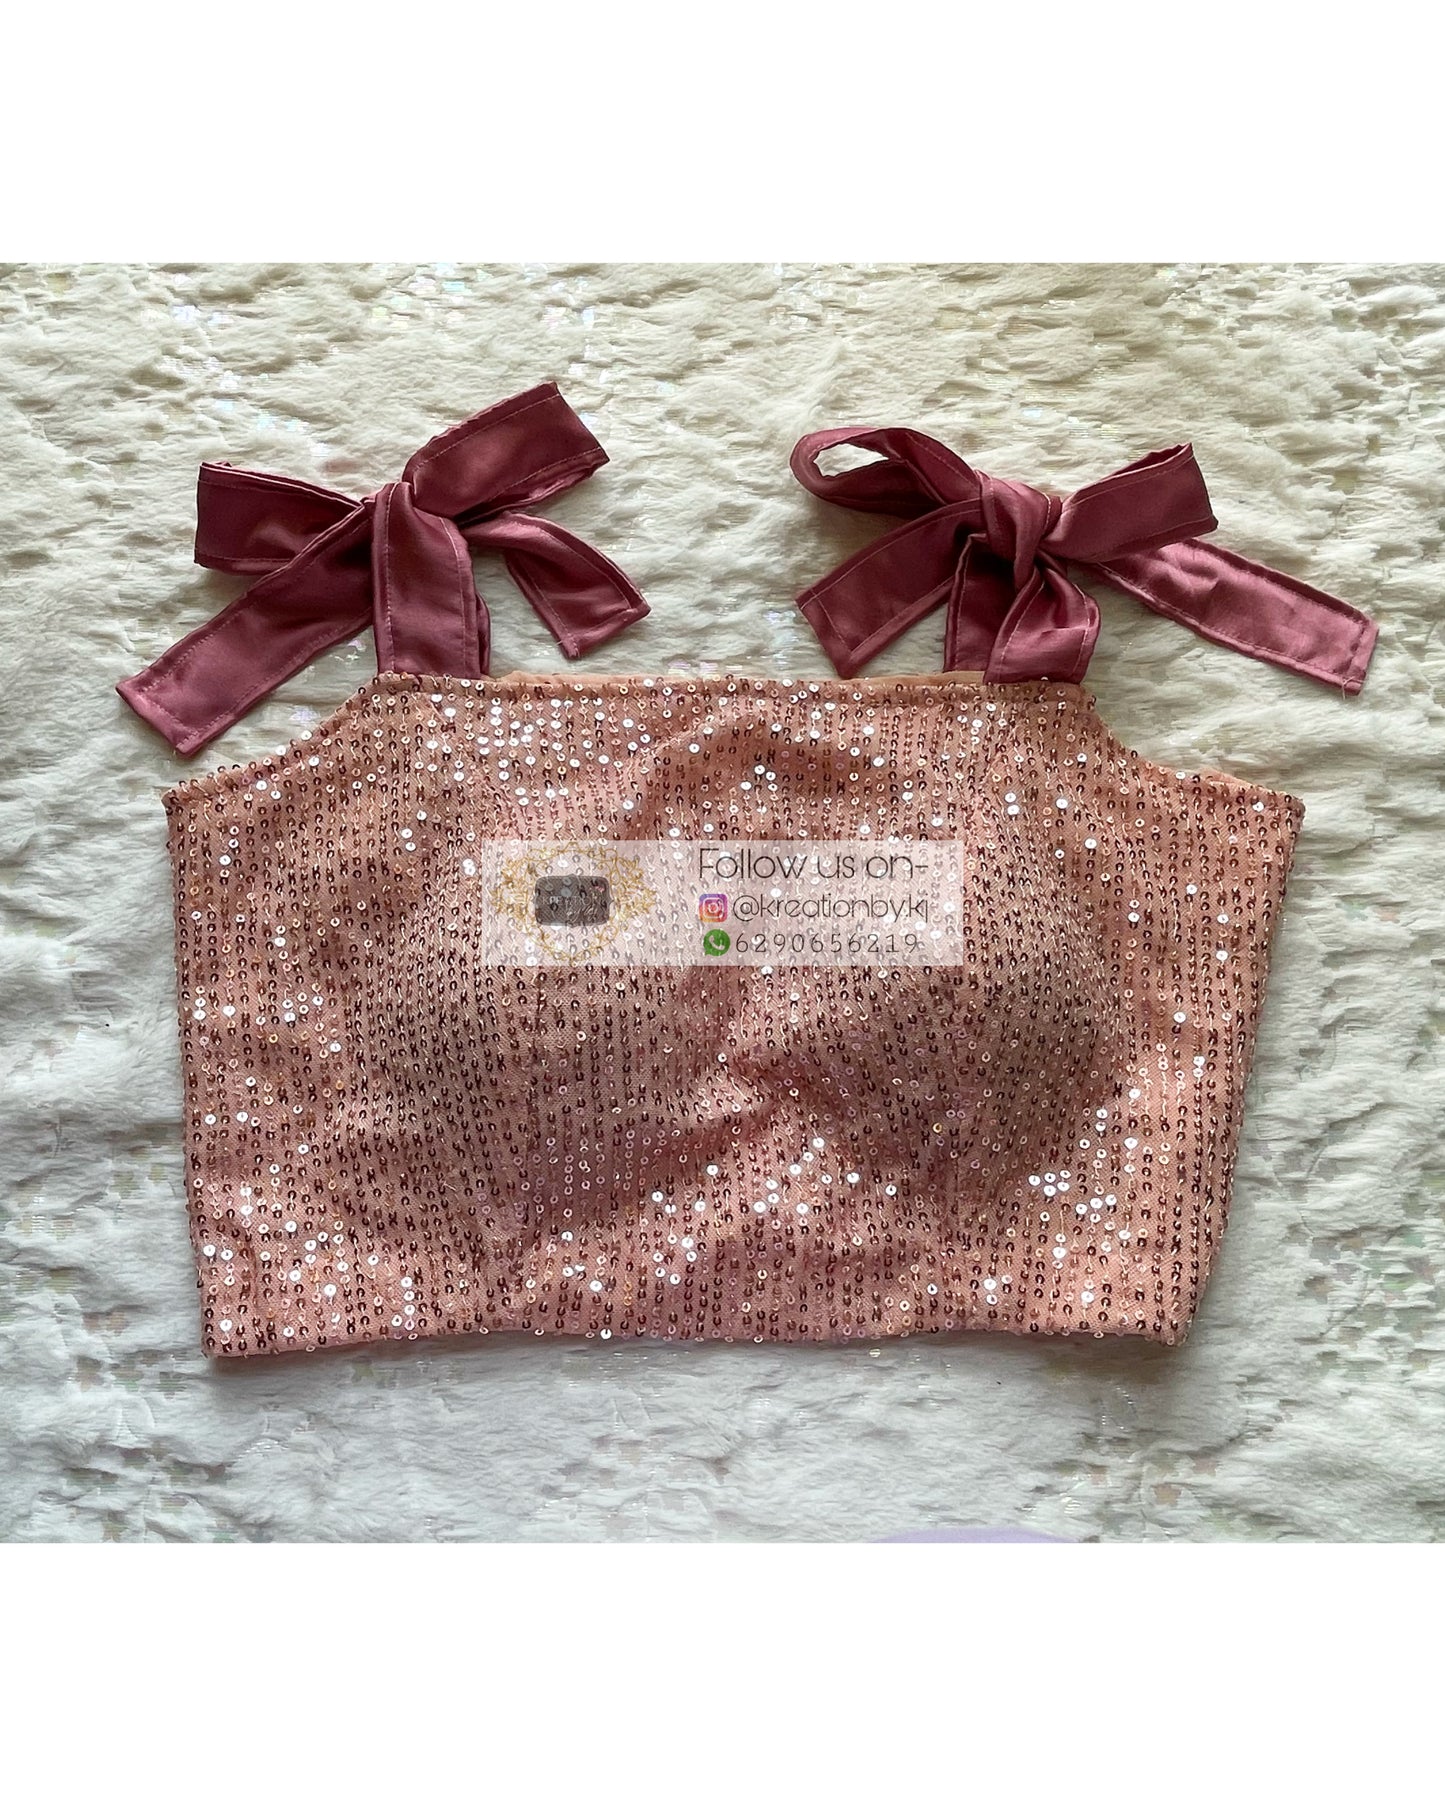 Alicia Champagne Pink Sequins Crop Top - kreationbykj